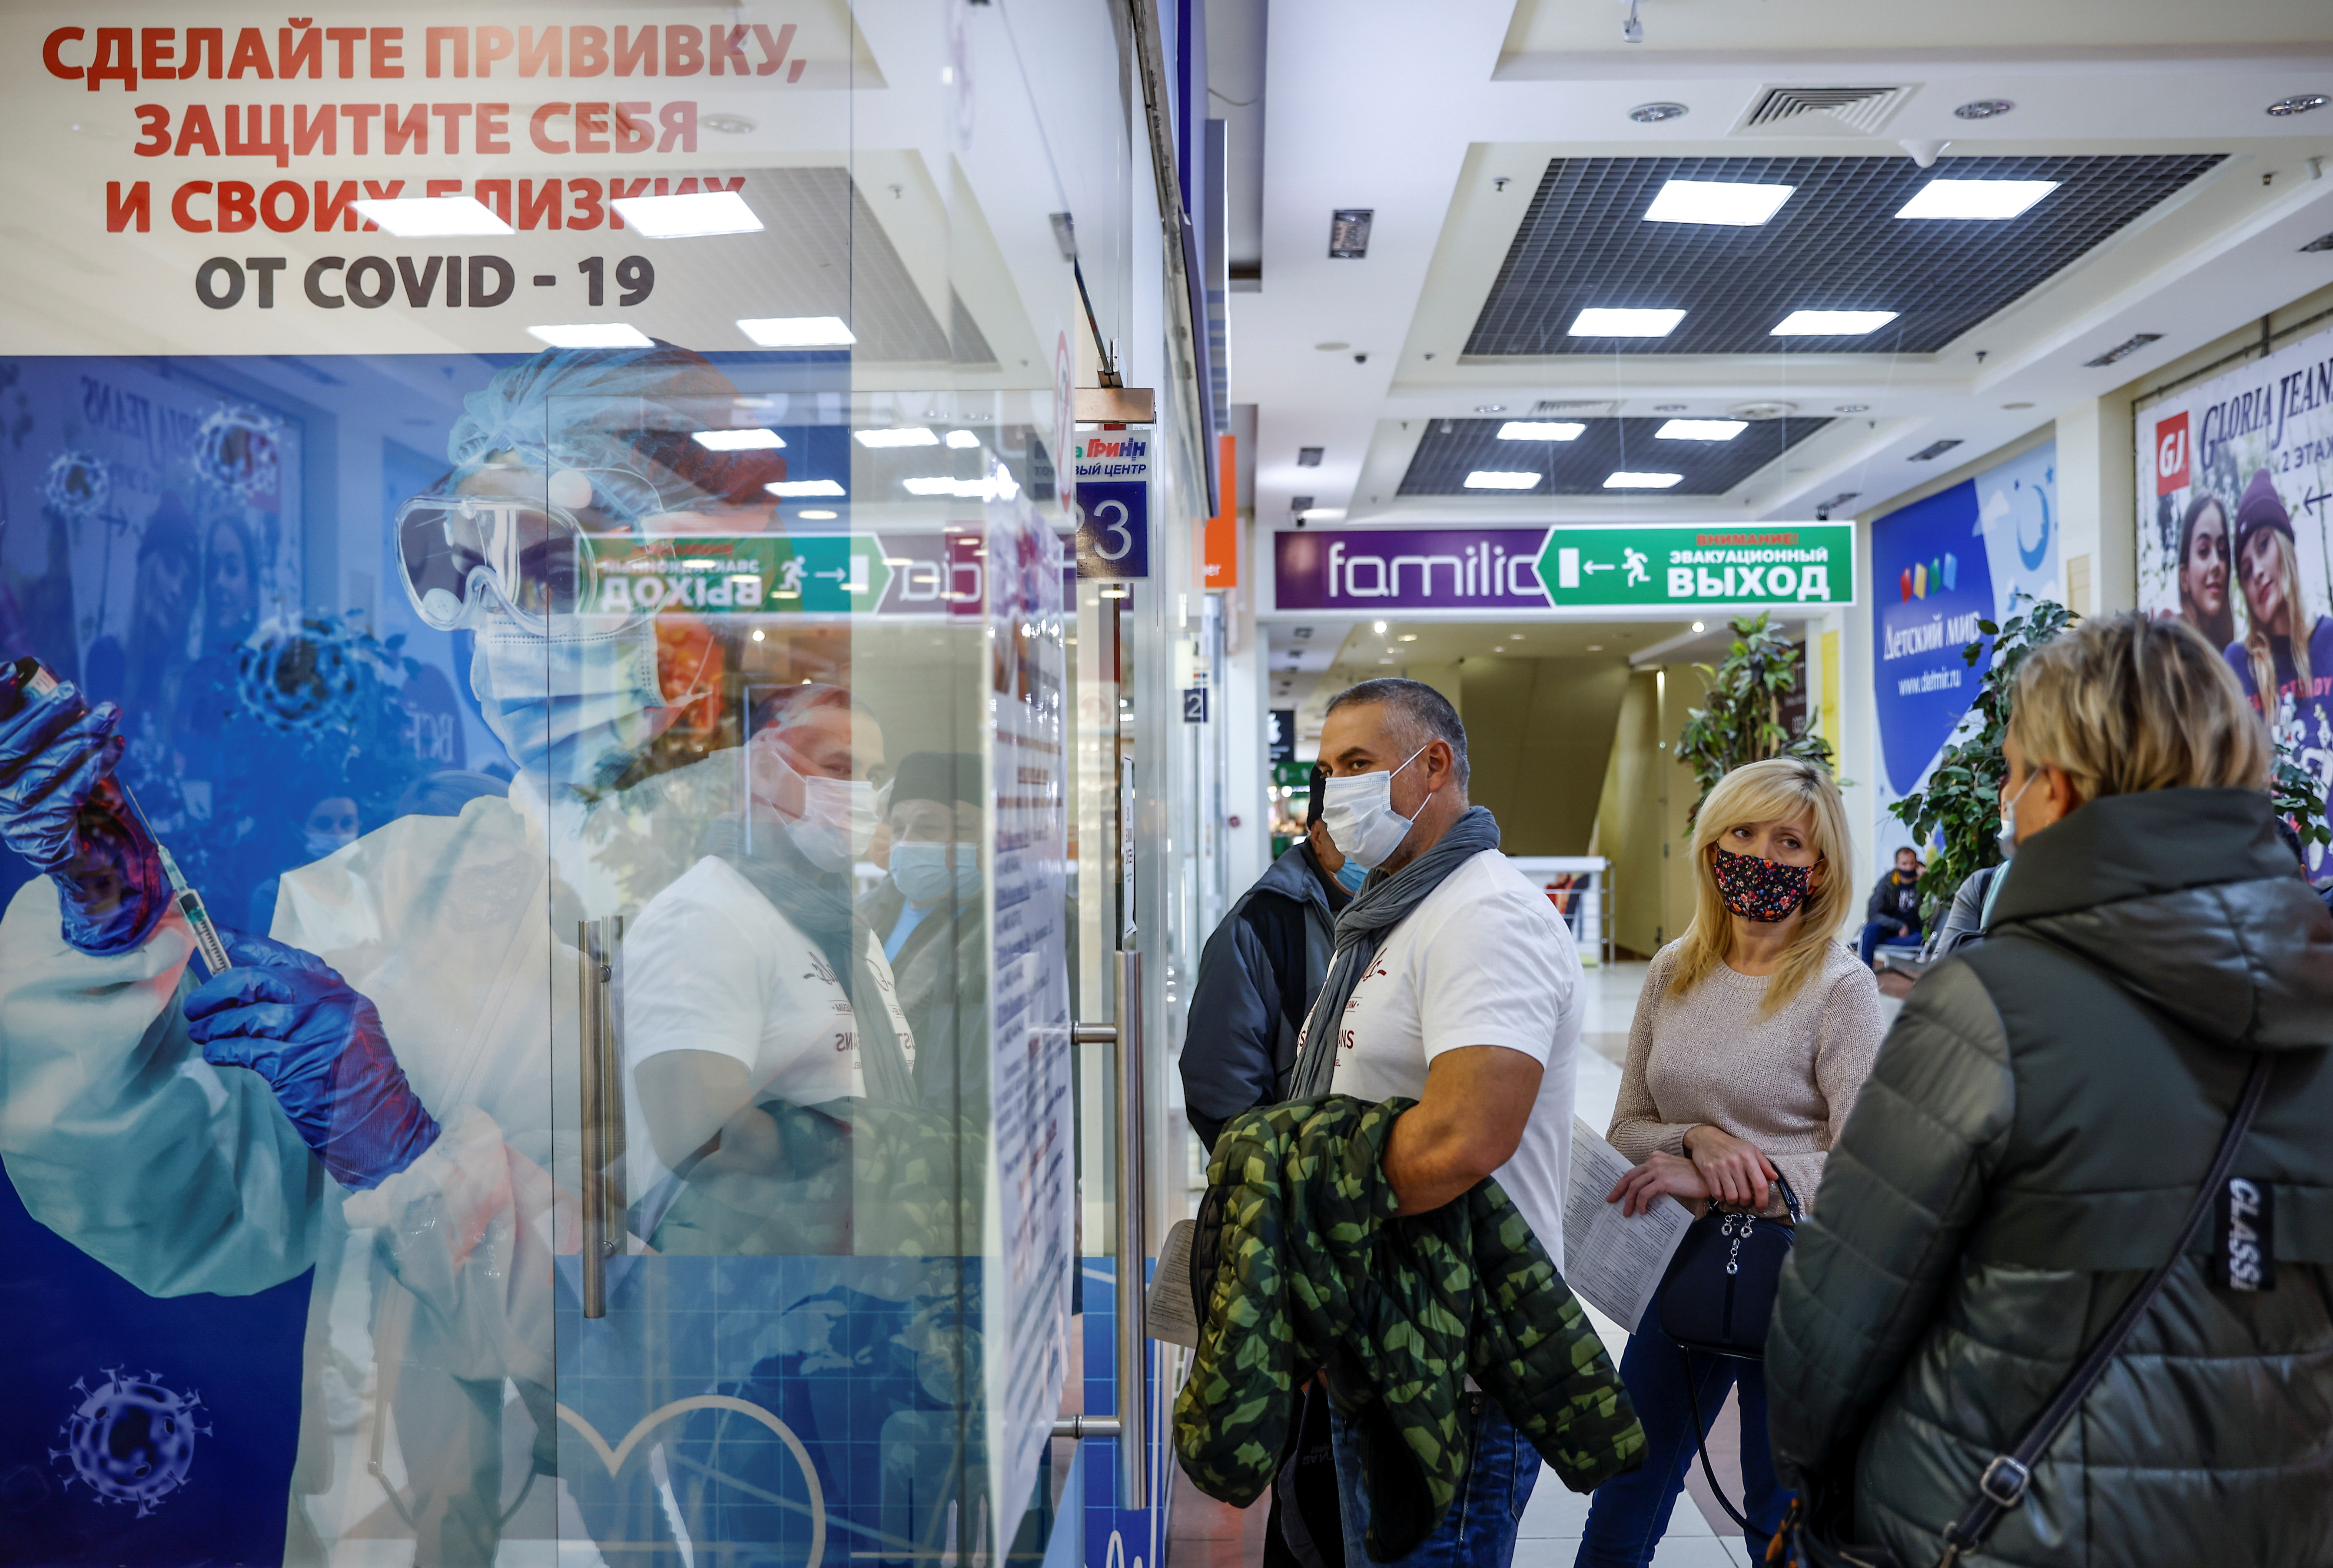 People stand in a line to receive a vaccine against the coronavirus disease in Oryol